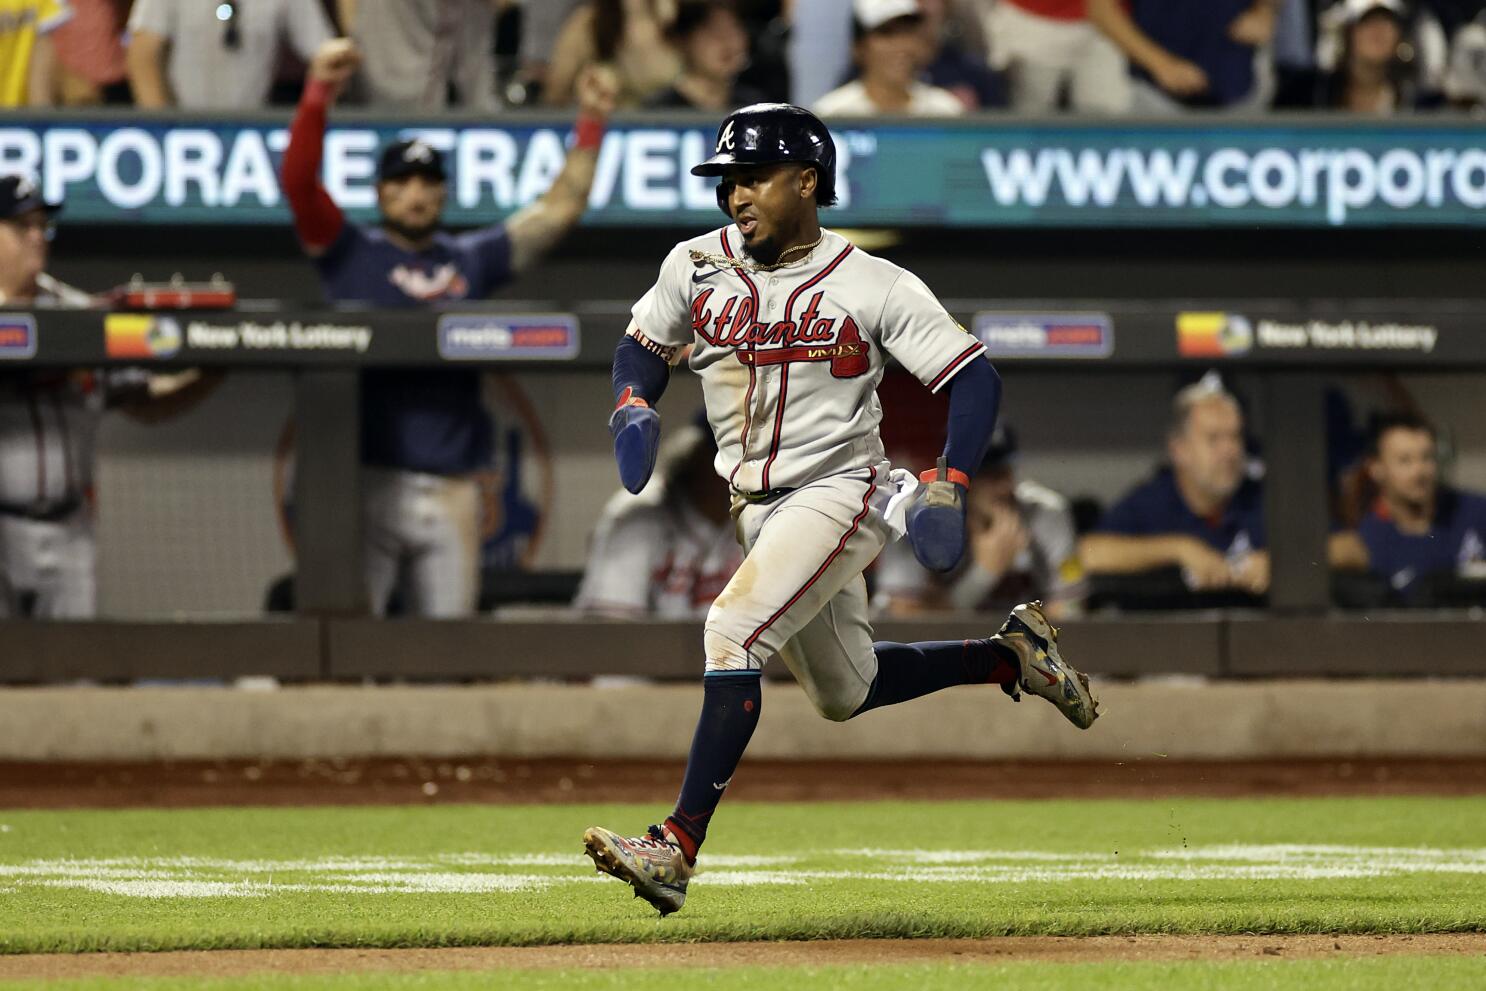 Ozzie Albies injury: Braves star second baseman to be placed on IL